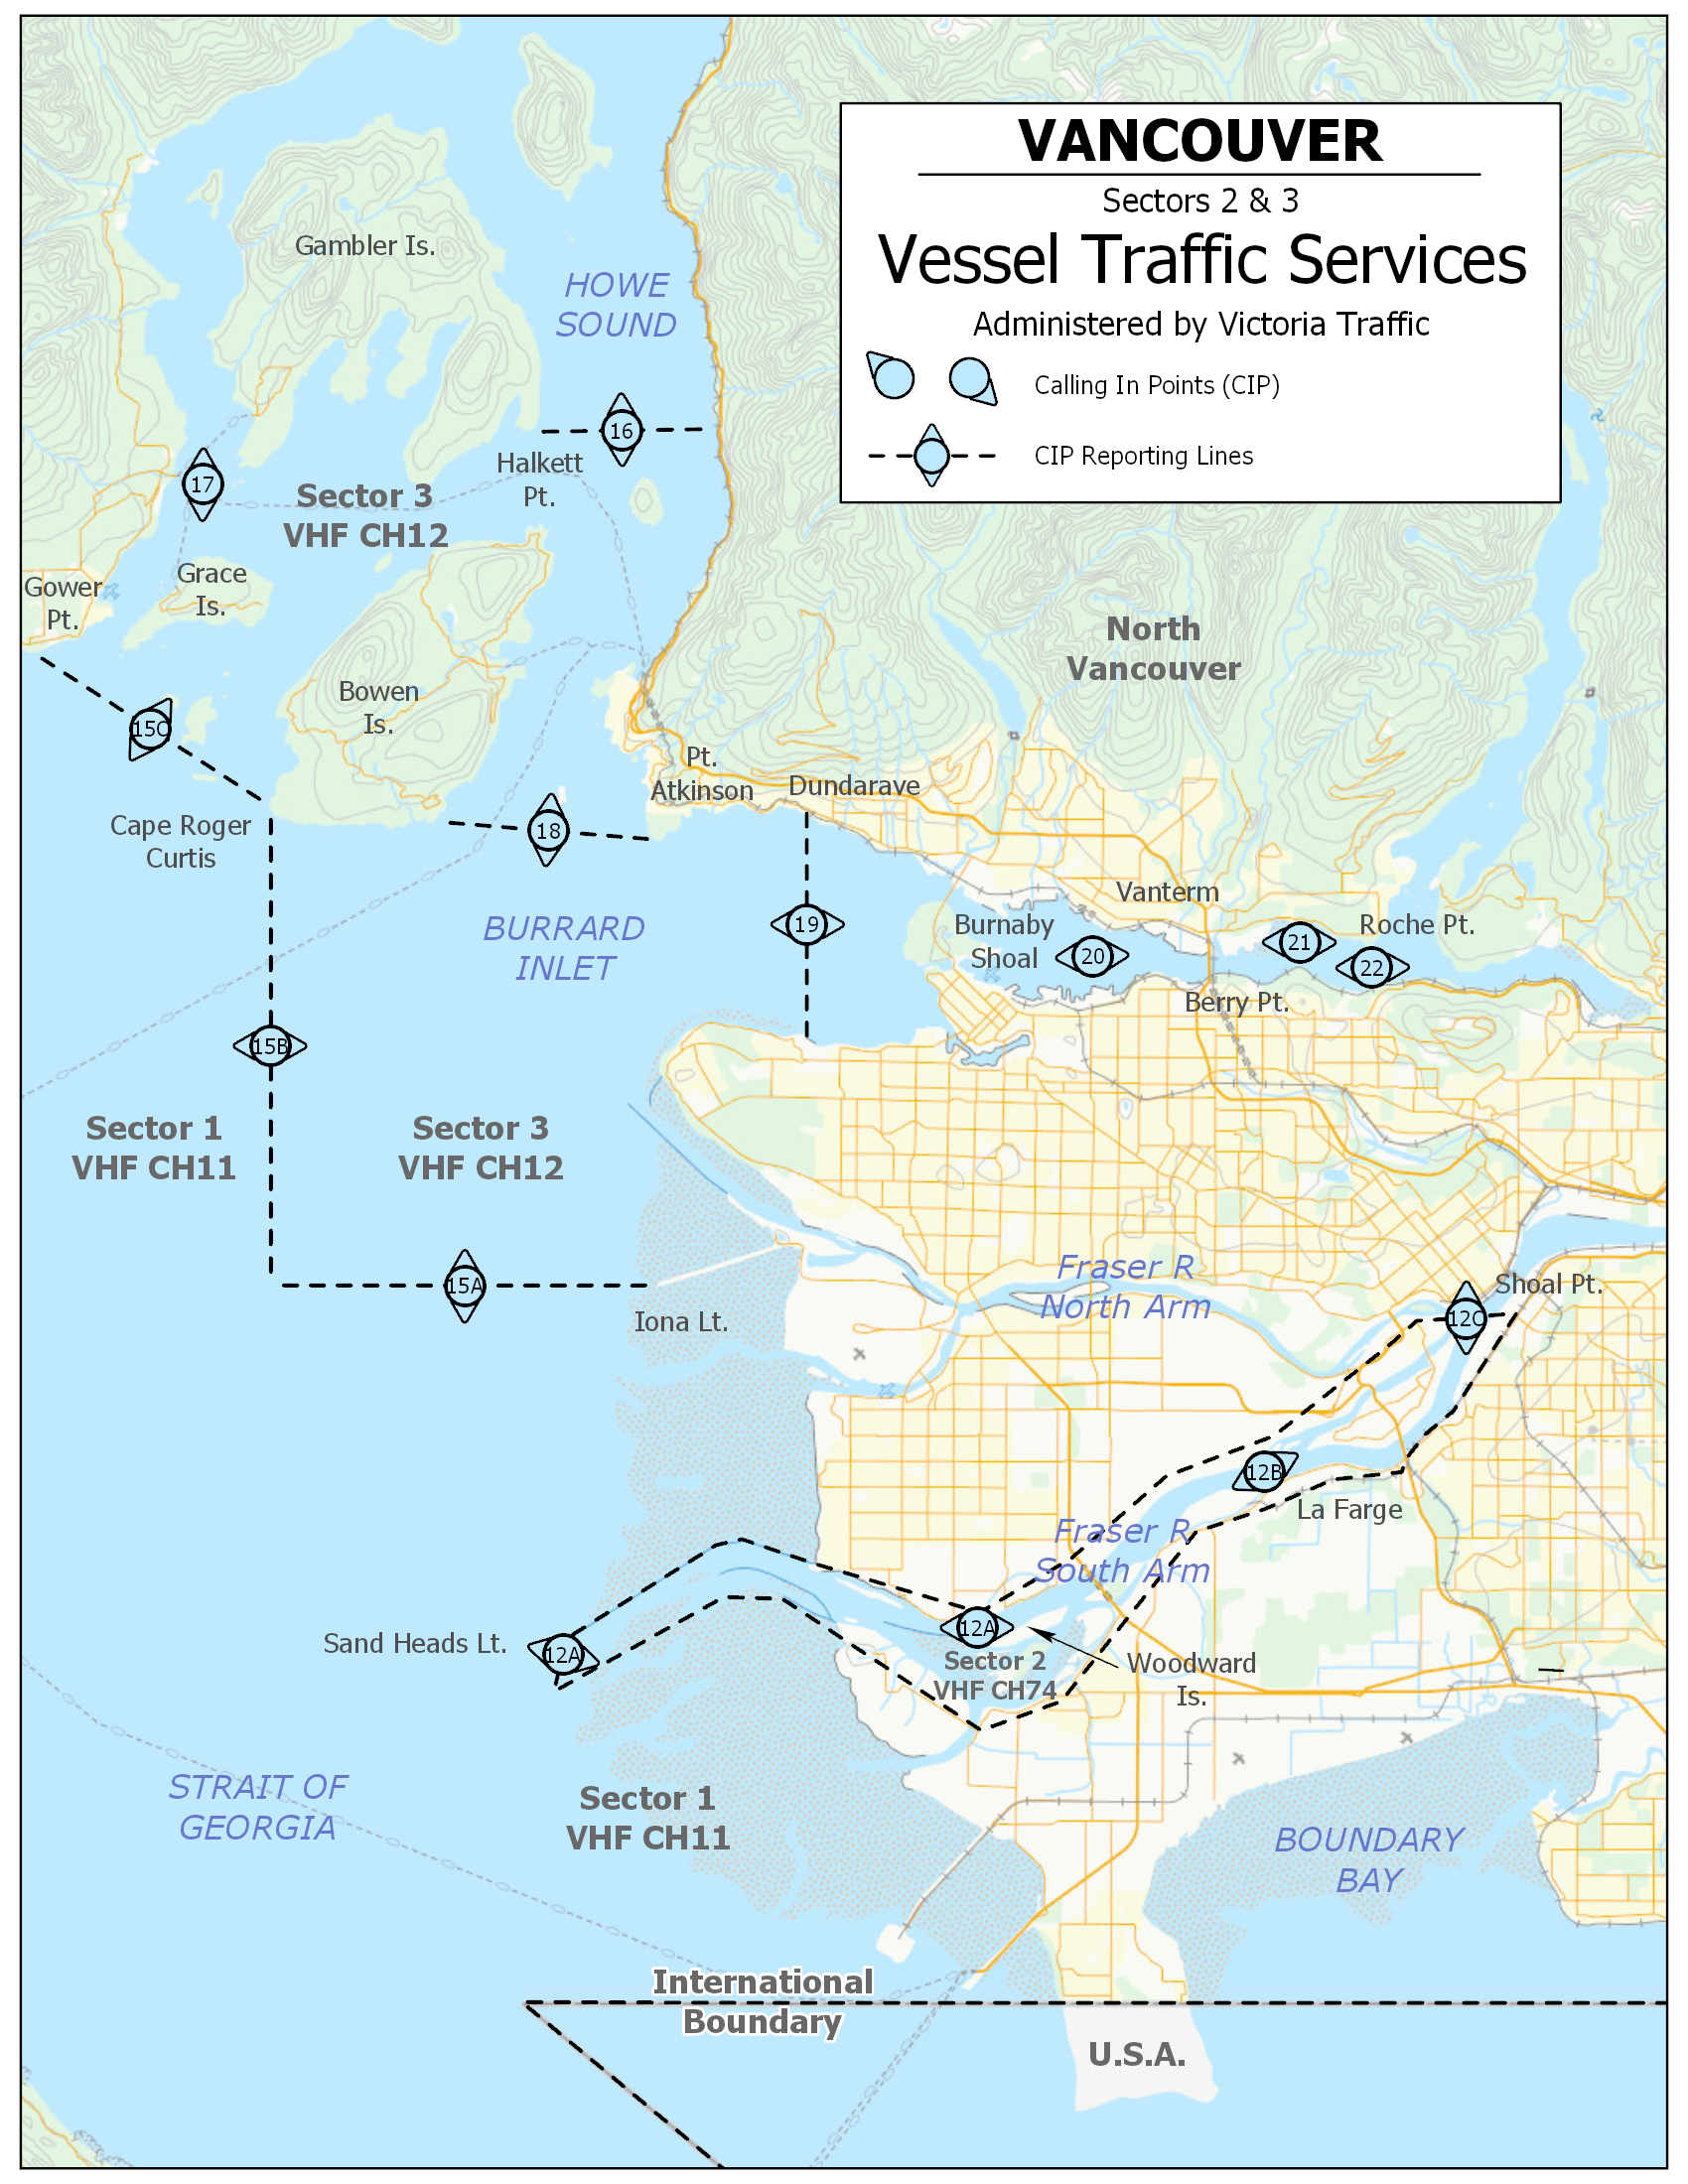 Vancouver Vessel Traffic Services Sector 2 and 3